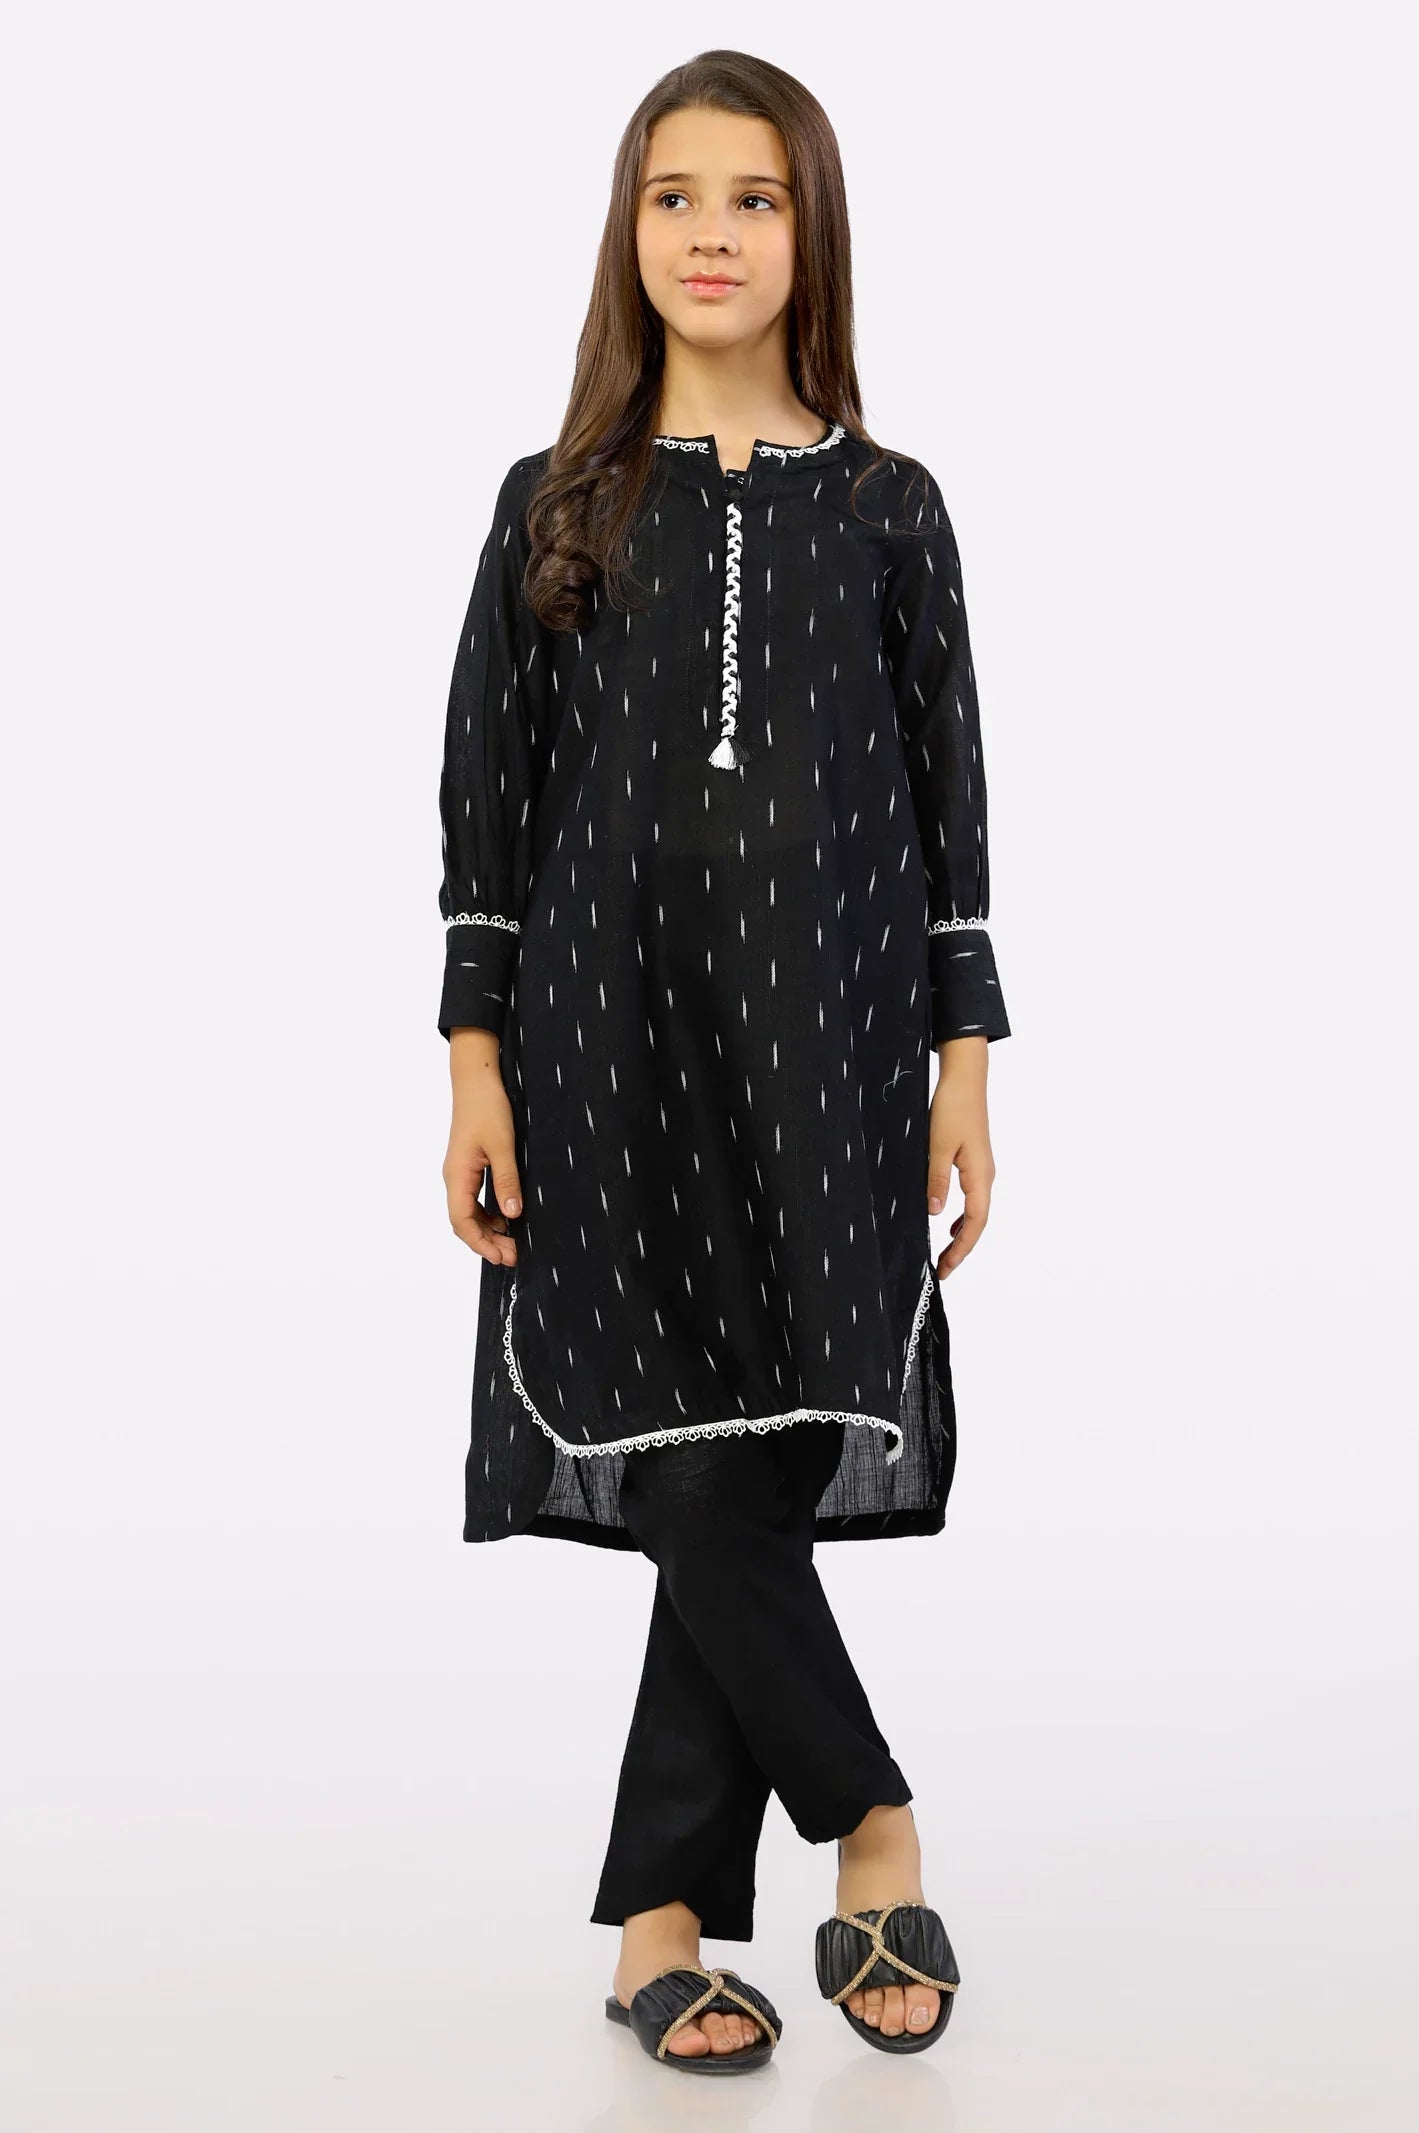 Black Crosshatch Dyed Teens 2PC Suit From Sohaye By Diners